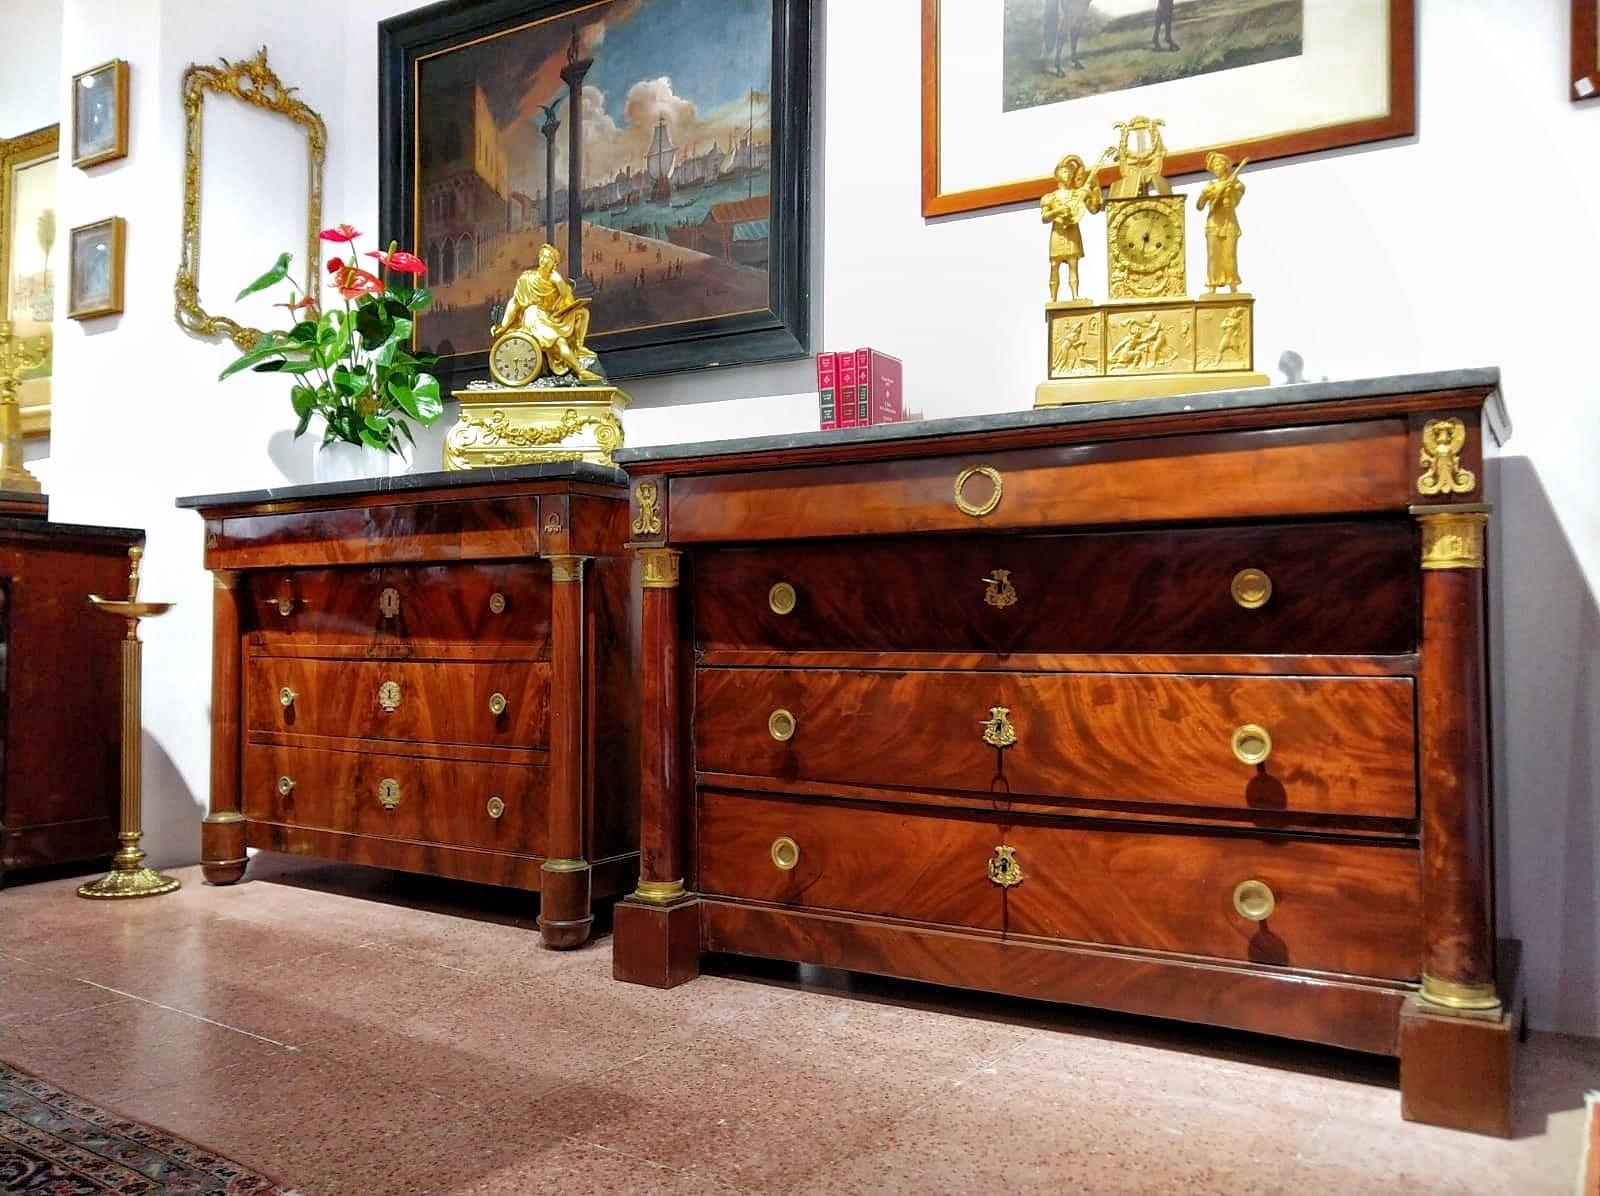 French Empire commode, early 19th century. Flame mahogany, marble, bronze details, with three working keys and four drawers.

Empire dresser with a great personality, wider and less deep than normal. Adorned with bronze details and knobs, with a